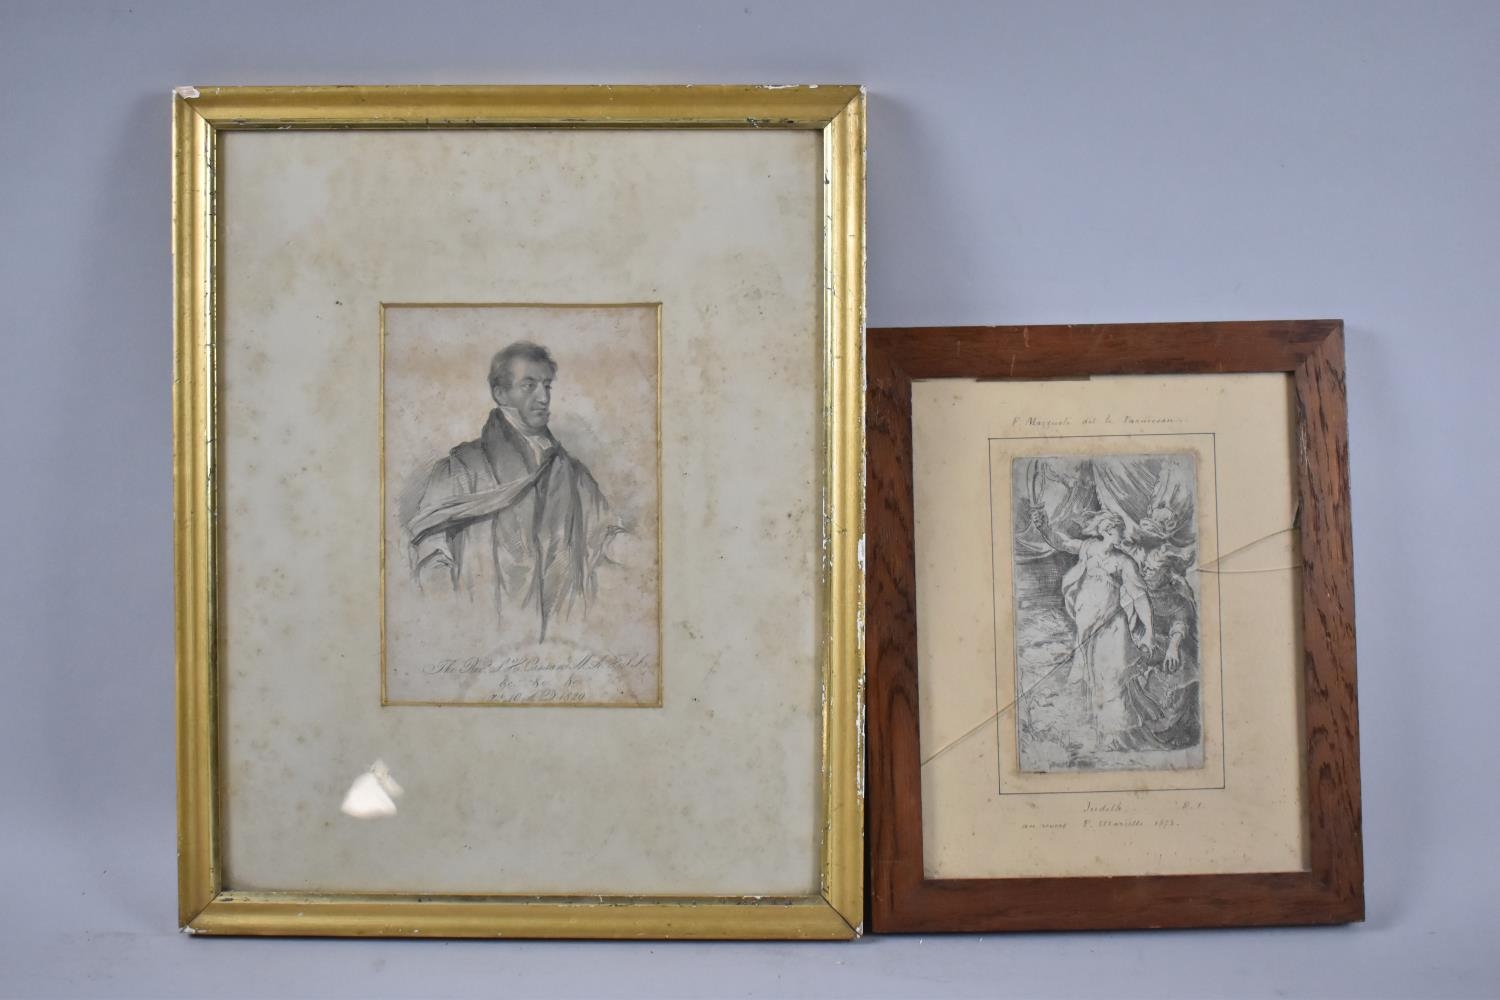 A Framed Engraving Titled in Pencil, Judith, together with a Gilt Framed Portrait of The Rev Cassan,